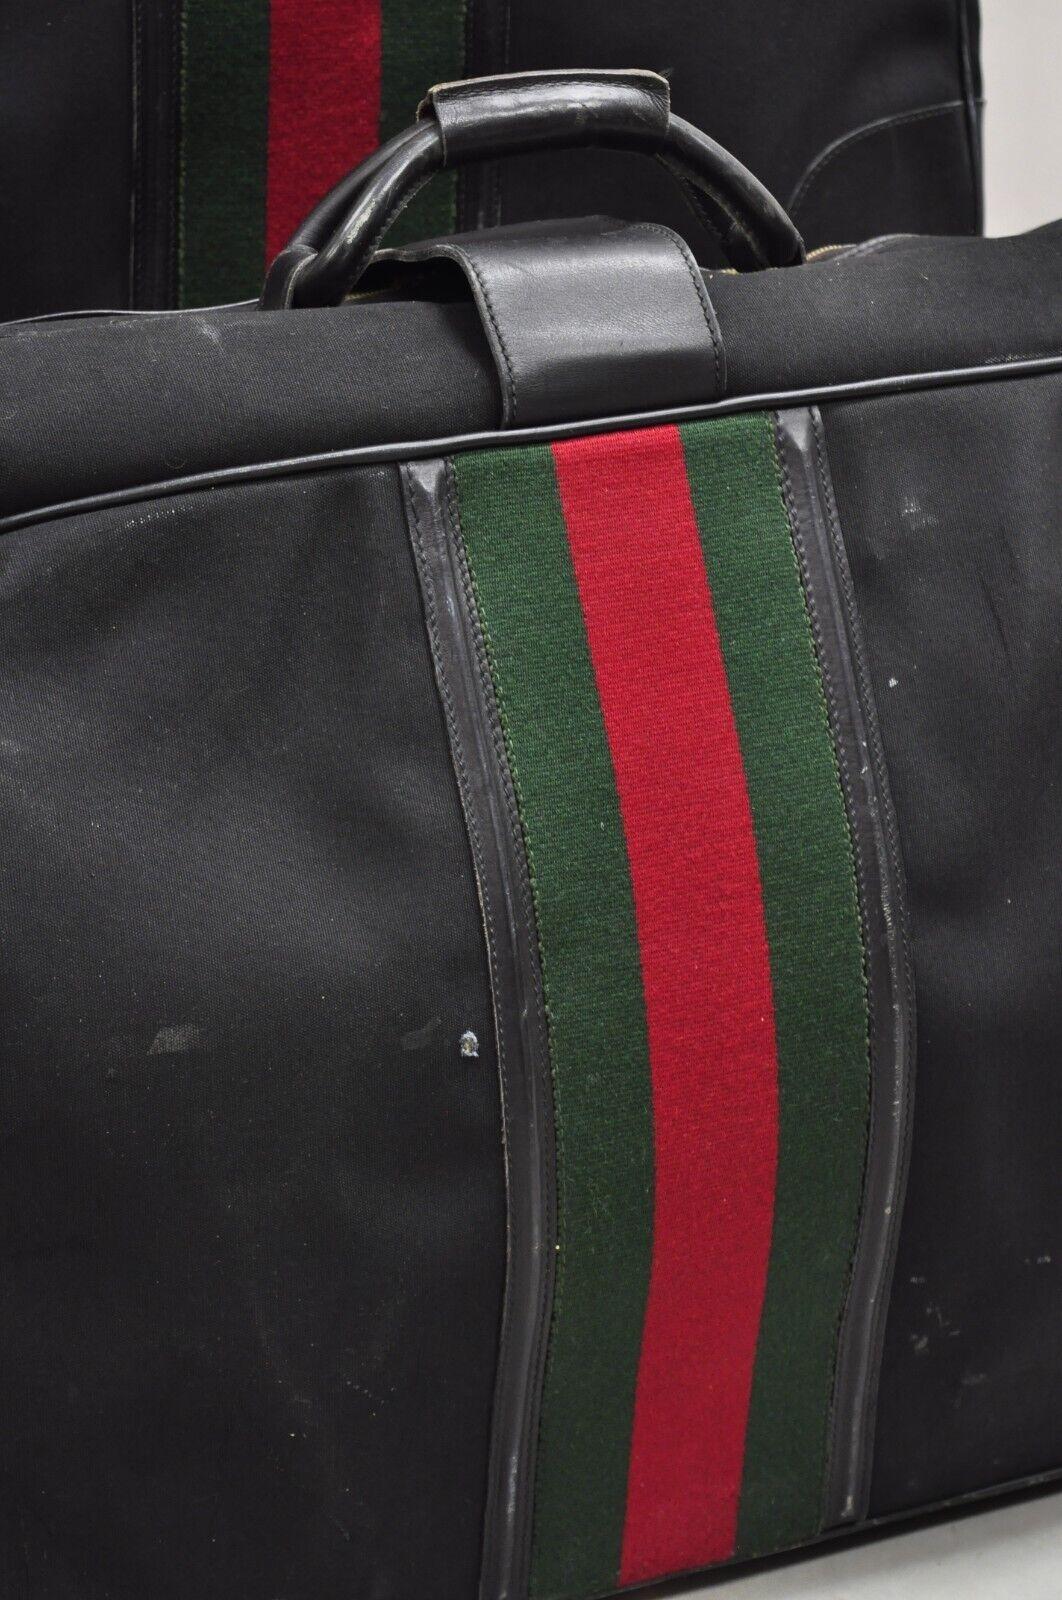 Vintage Gucci Black Canvas and Leather Suitcase Luggage His and Hers Set - 2 Pcs For Sale 1